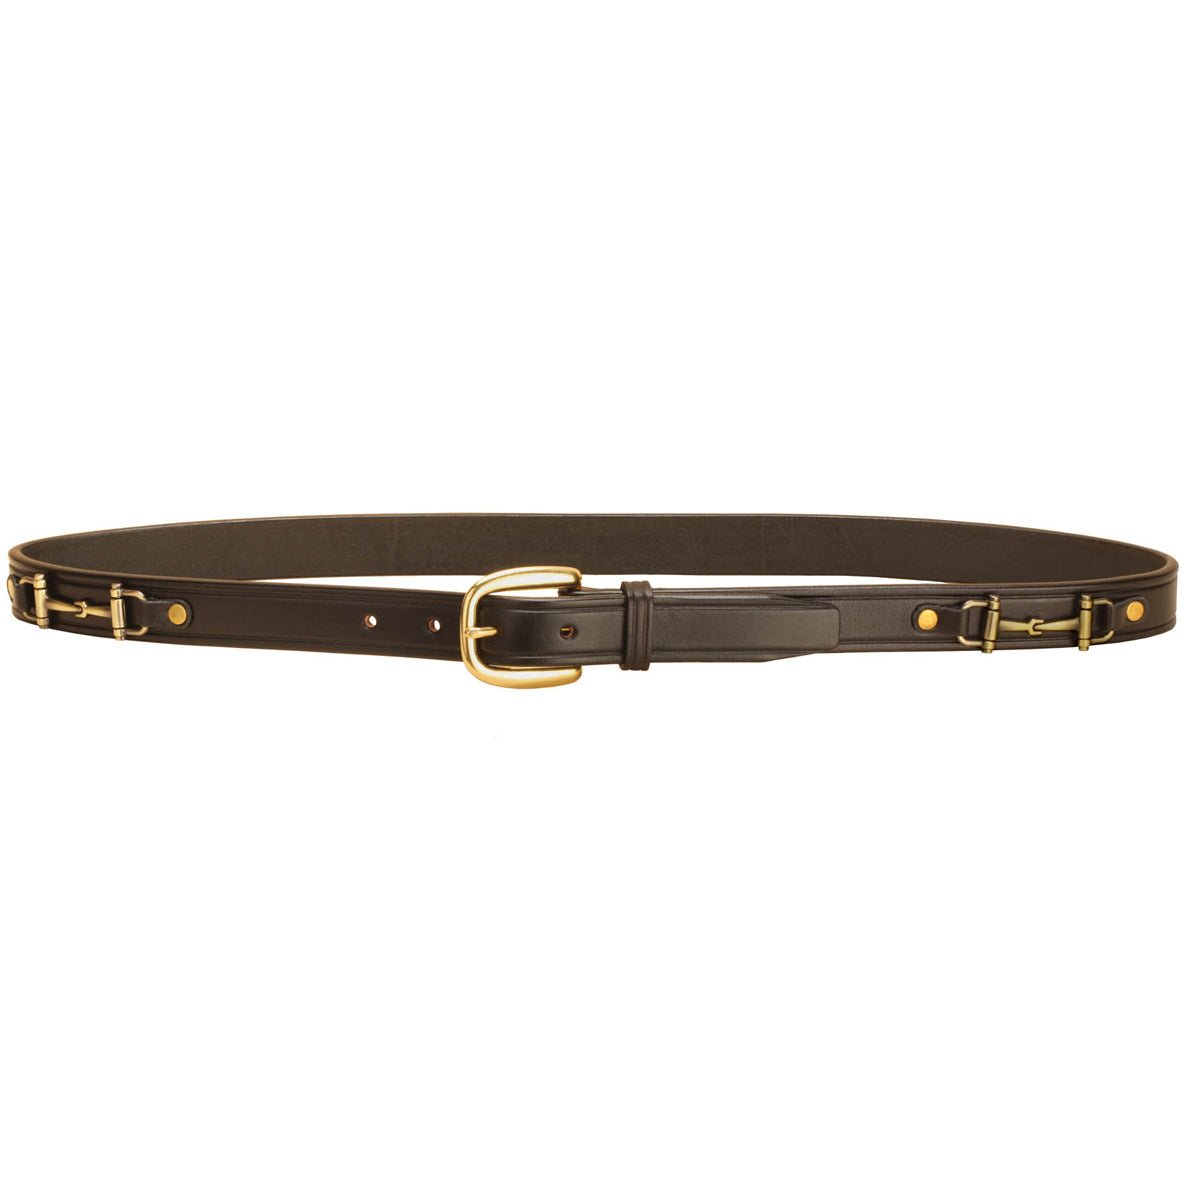 Tory Leather Repeated Stitch Pattern Belt | Farm House Tack